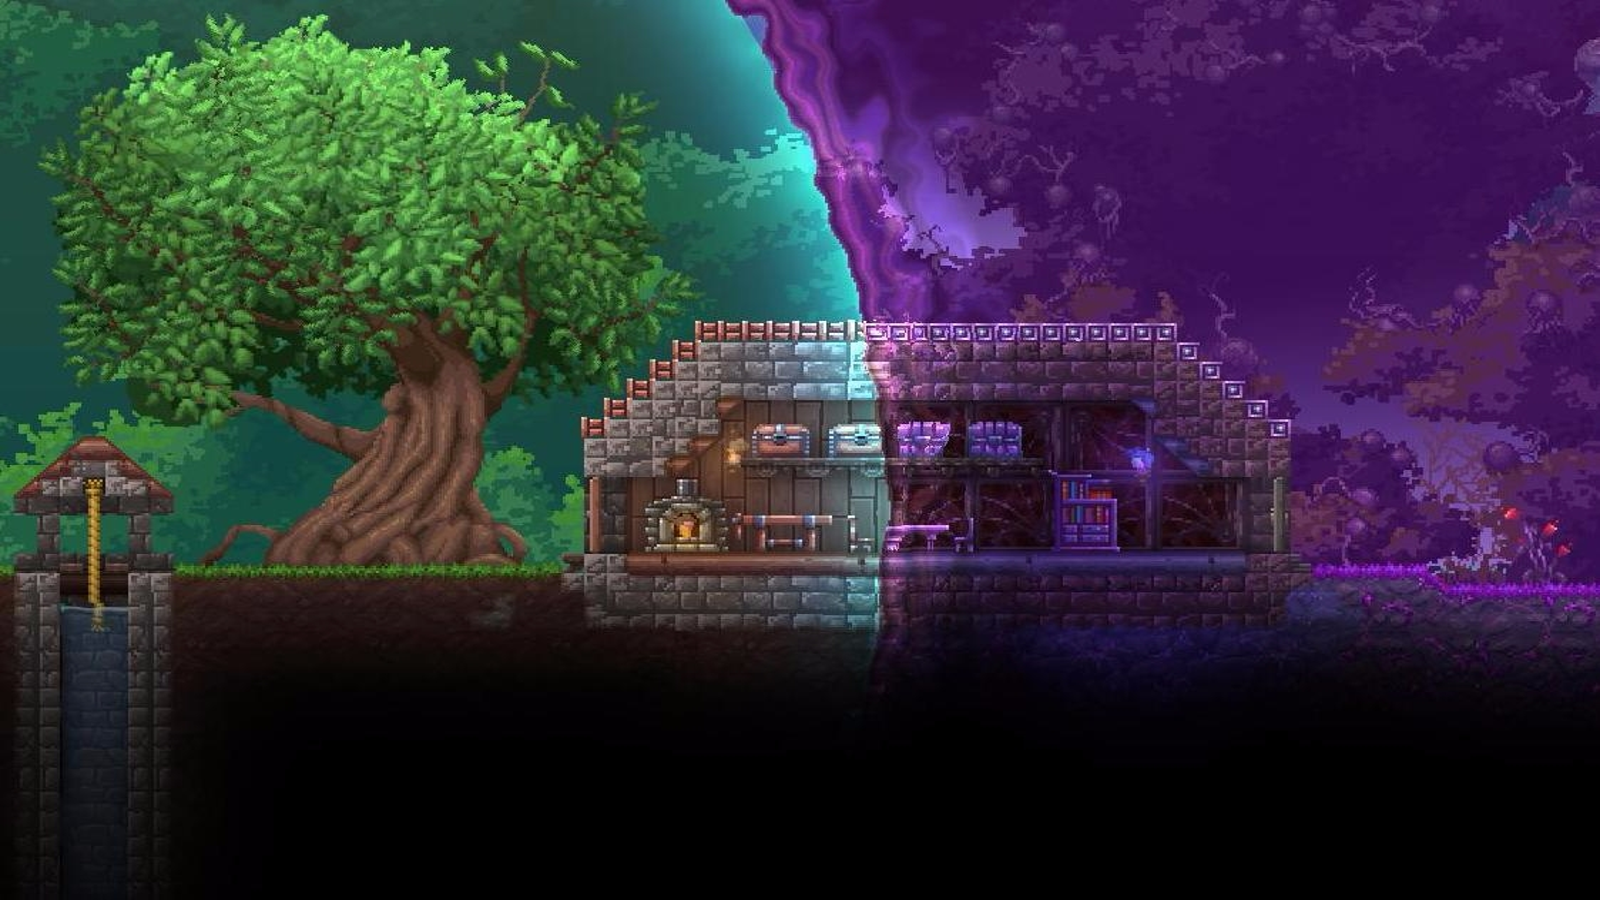 Re-Logic Launches the Terraria Steam Workshop Update - KeenGamer